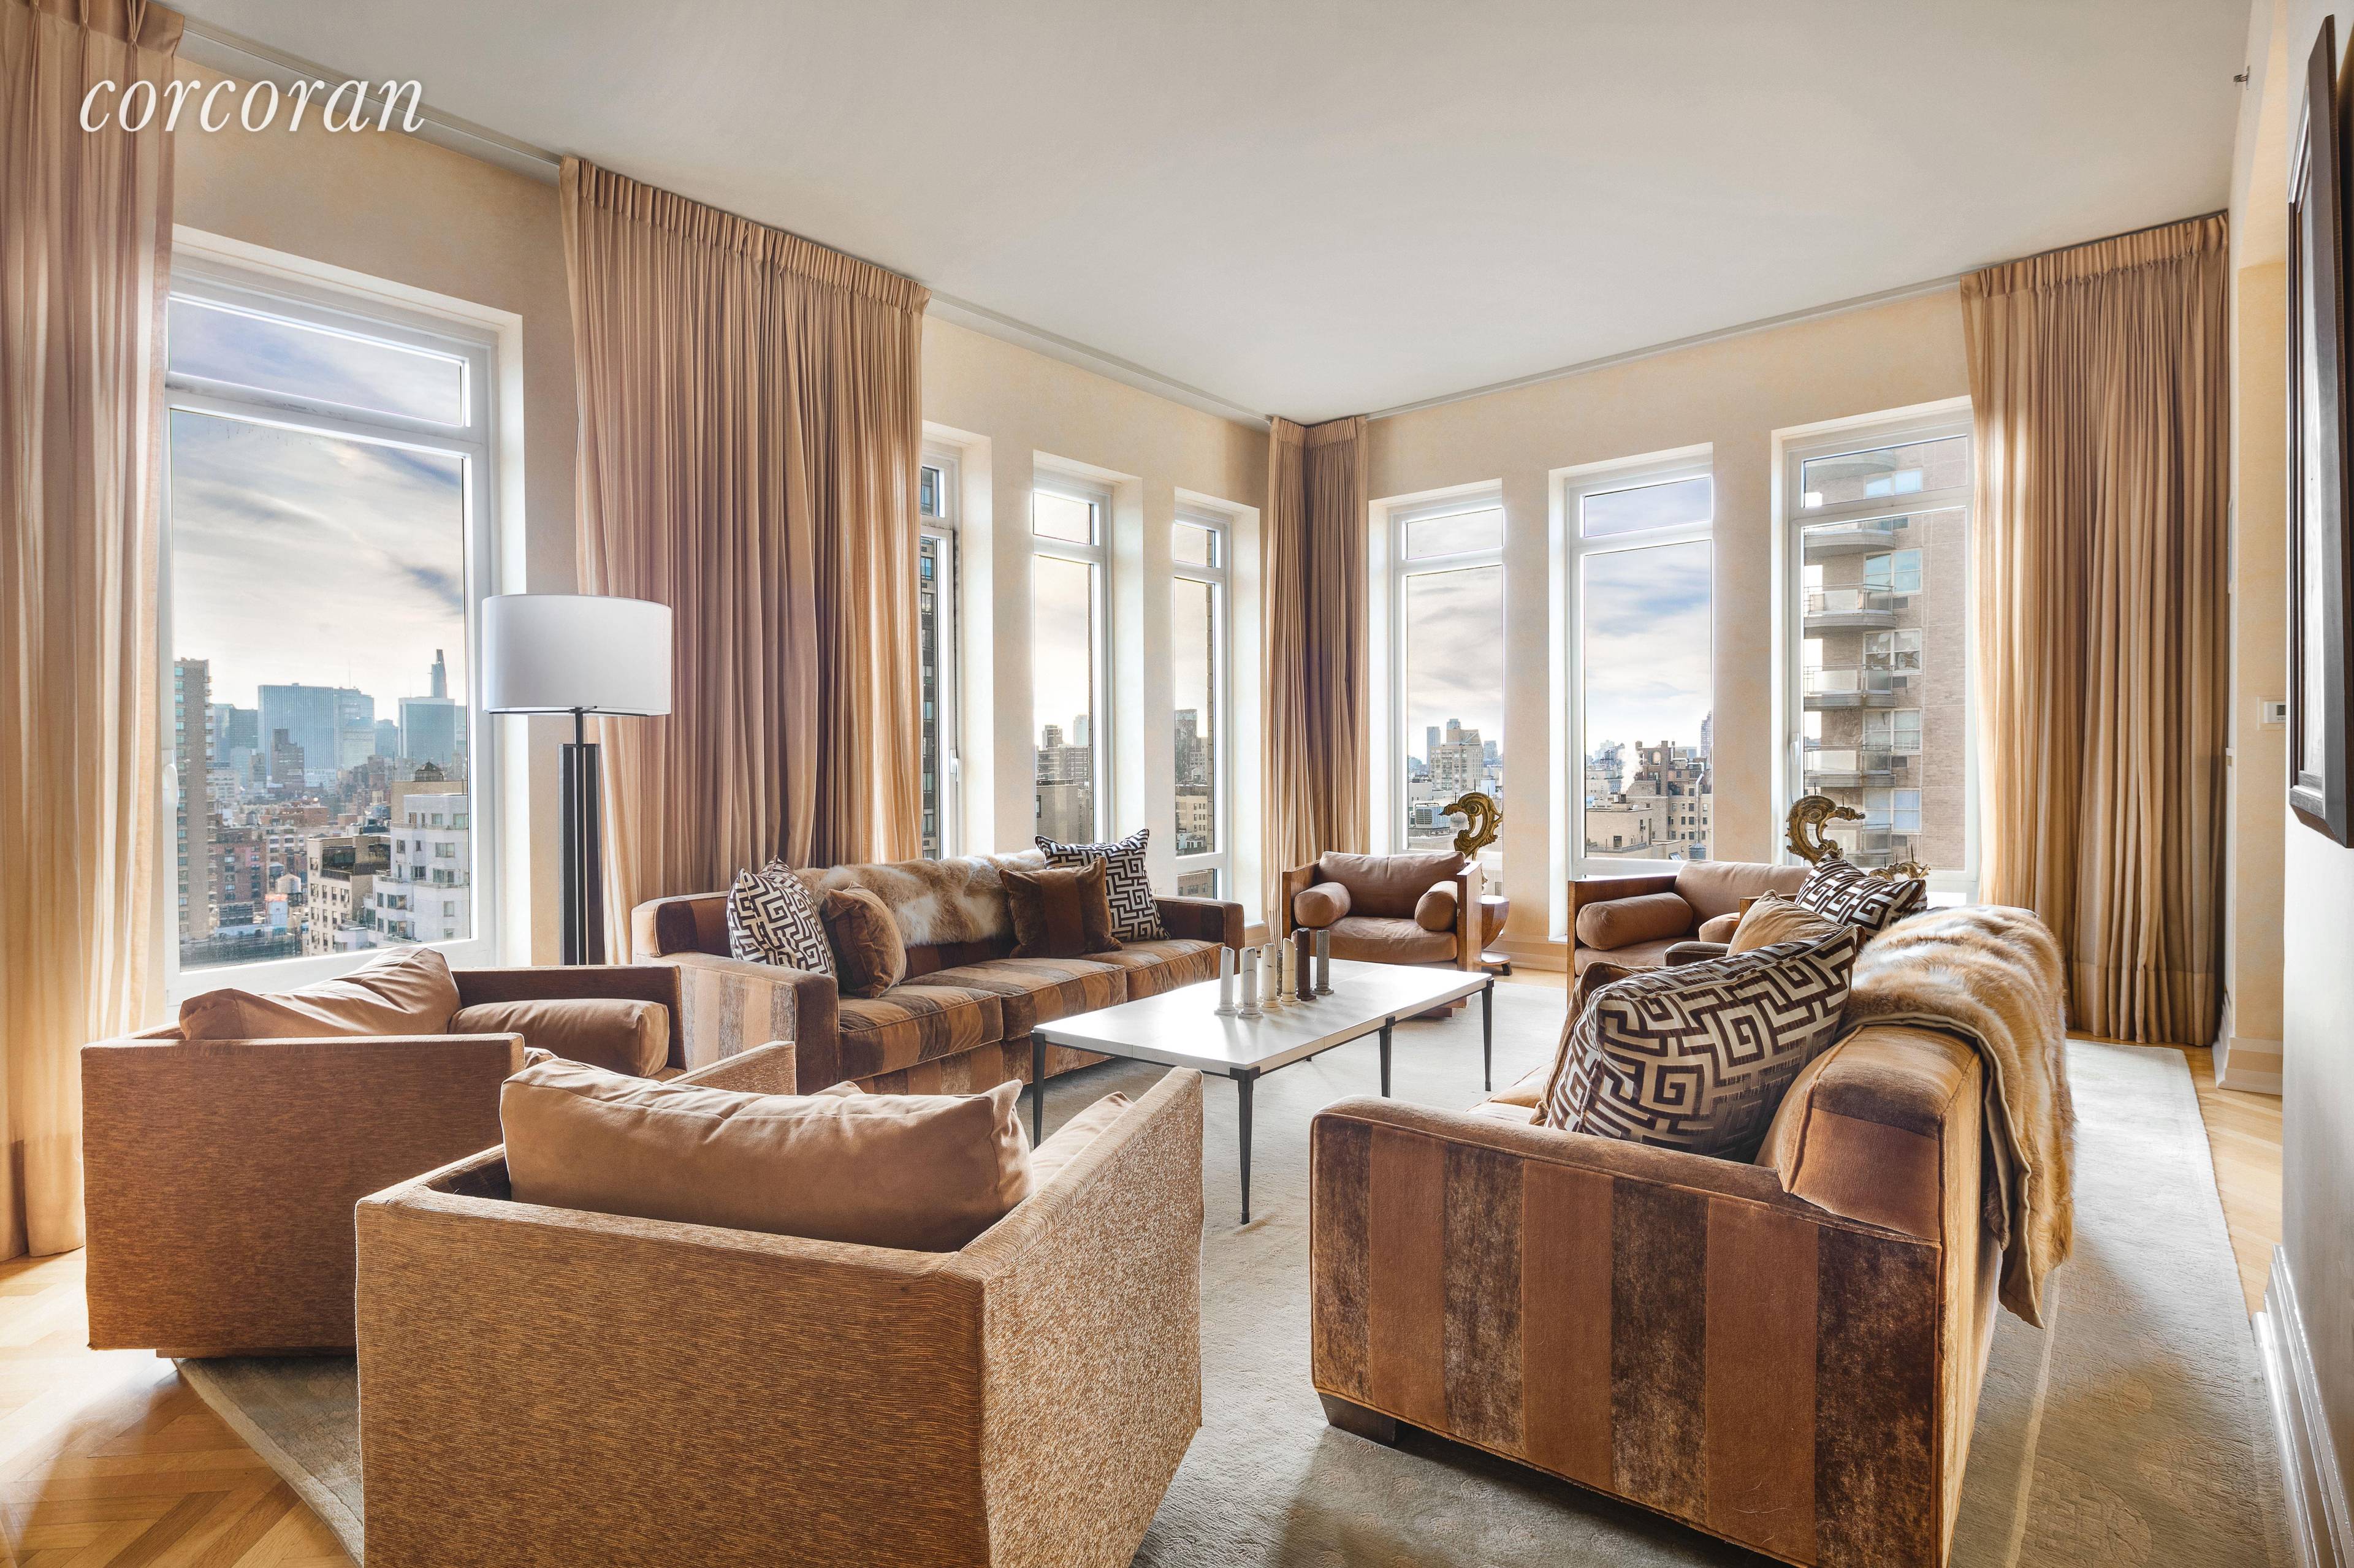 Live in this penthouse ranch in the sky, perched atop a full service condominium located in prime Upper East Side.